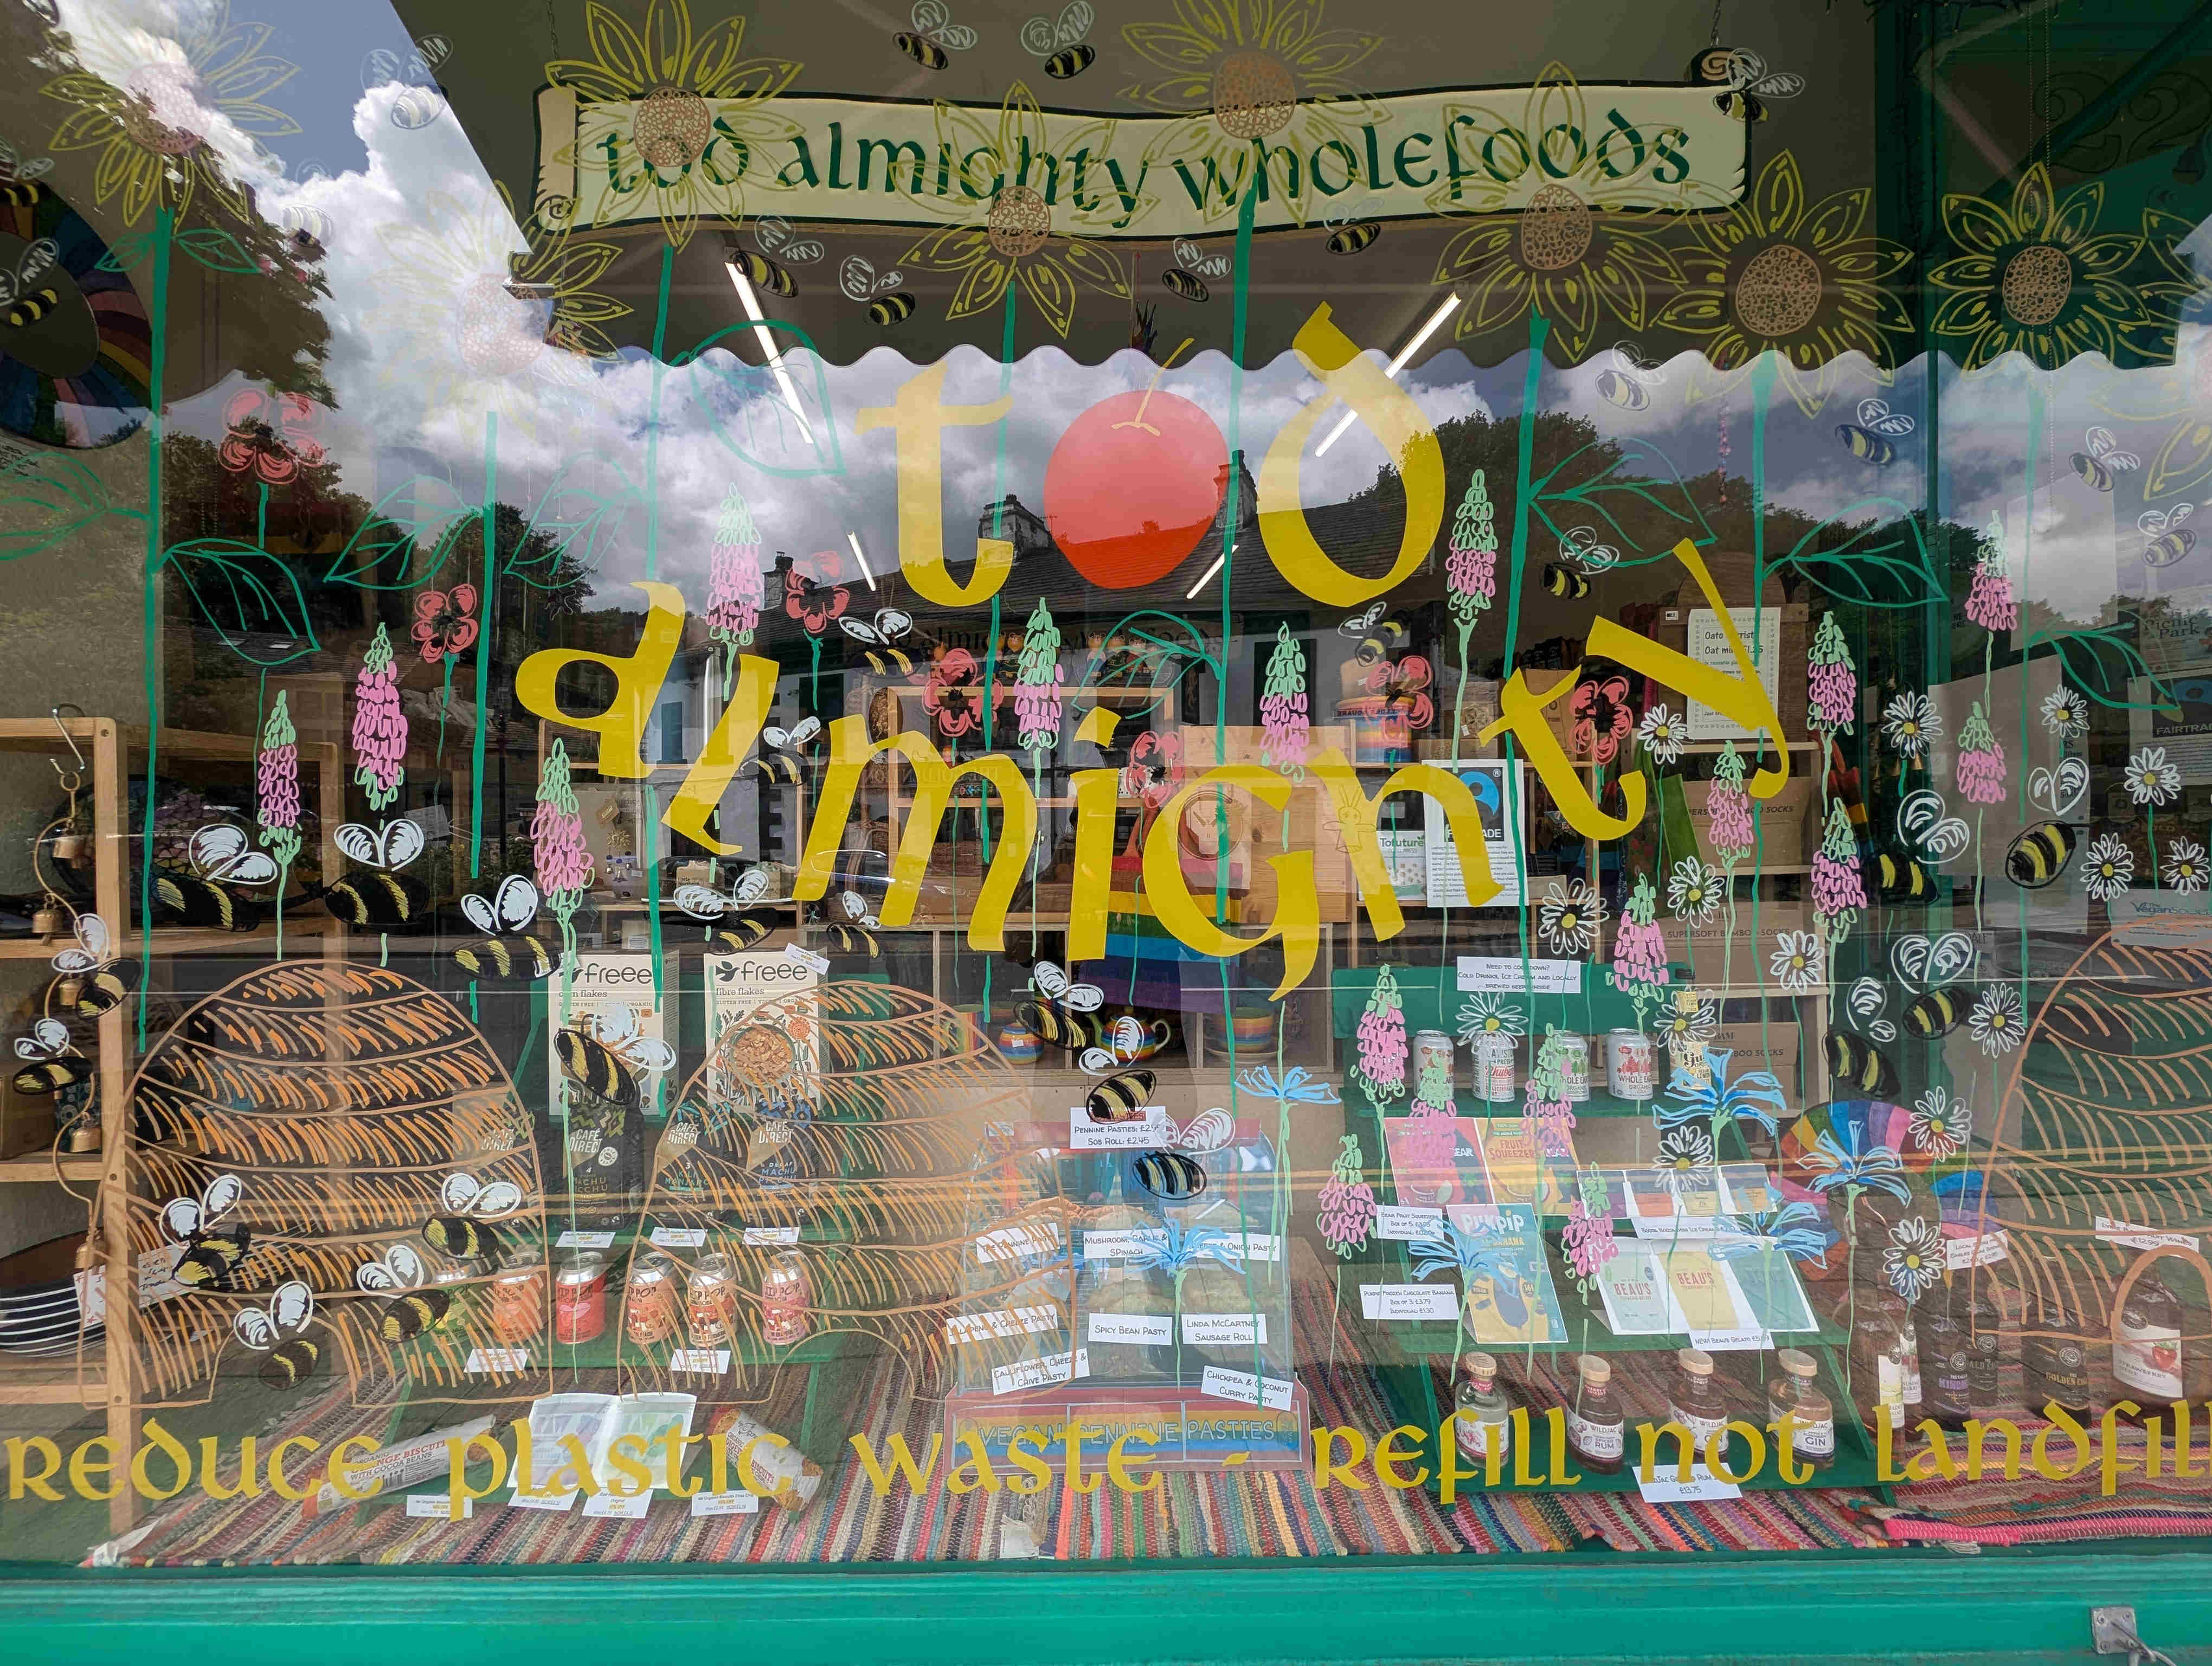 Our fabulous wholefoods (refills, vegan and organic) store at 22 Rochdale Road, Todmorden, West Yorkshire, UK